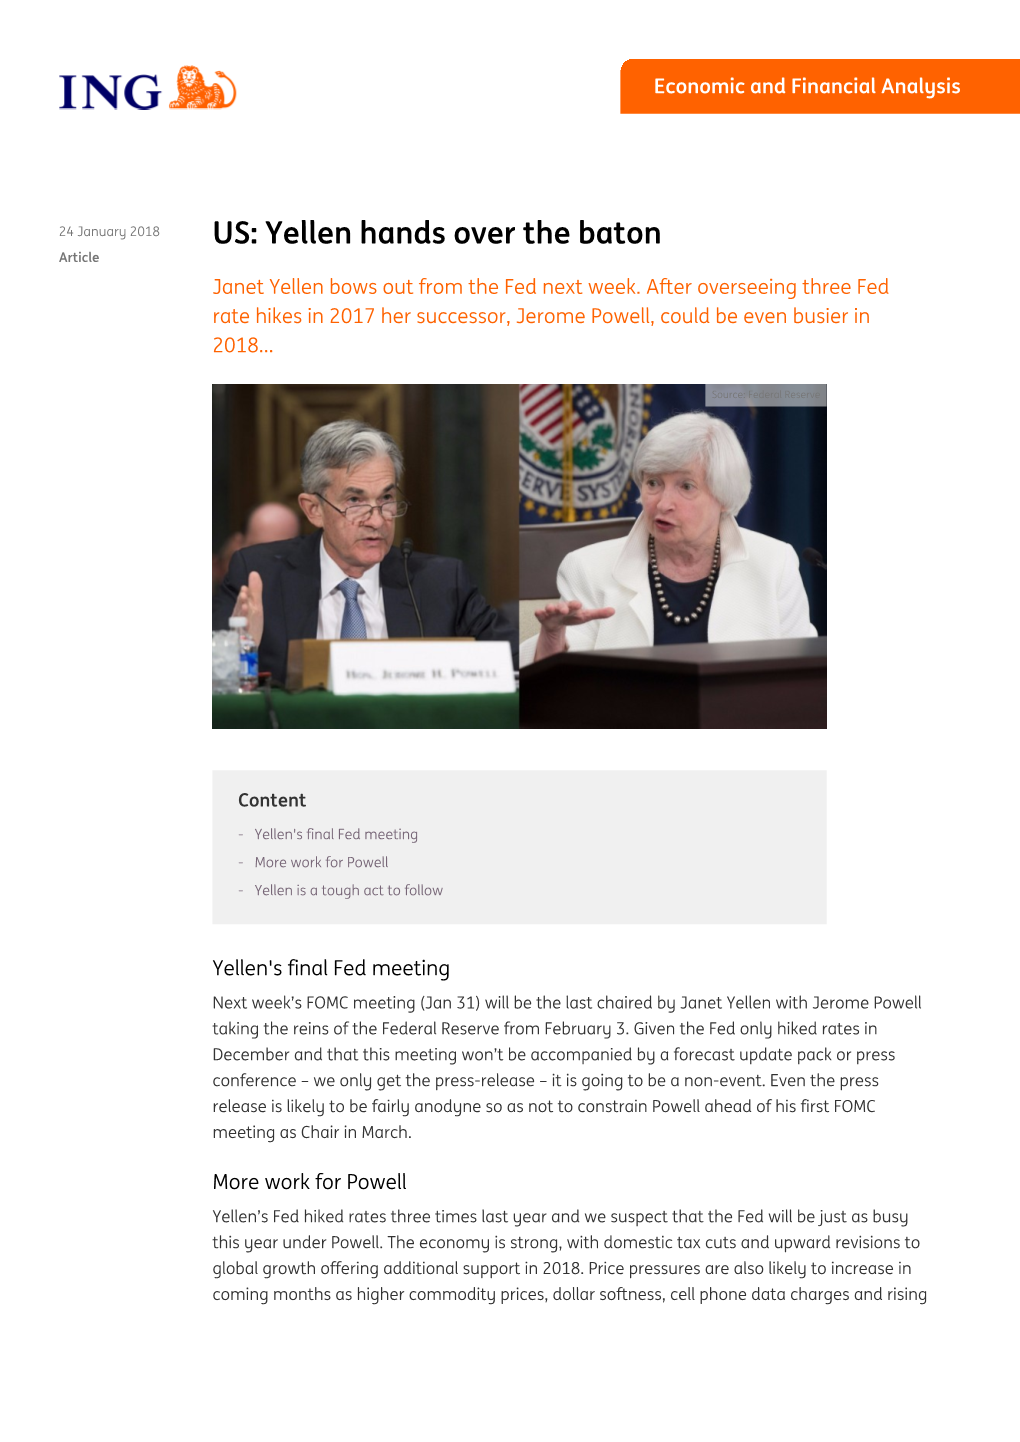 Yellen Hands Over the Baton Article Janet Yellen Bows out from the Fed Next Week